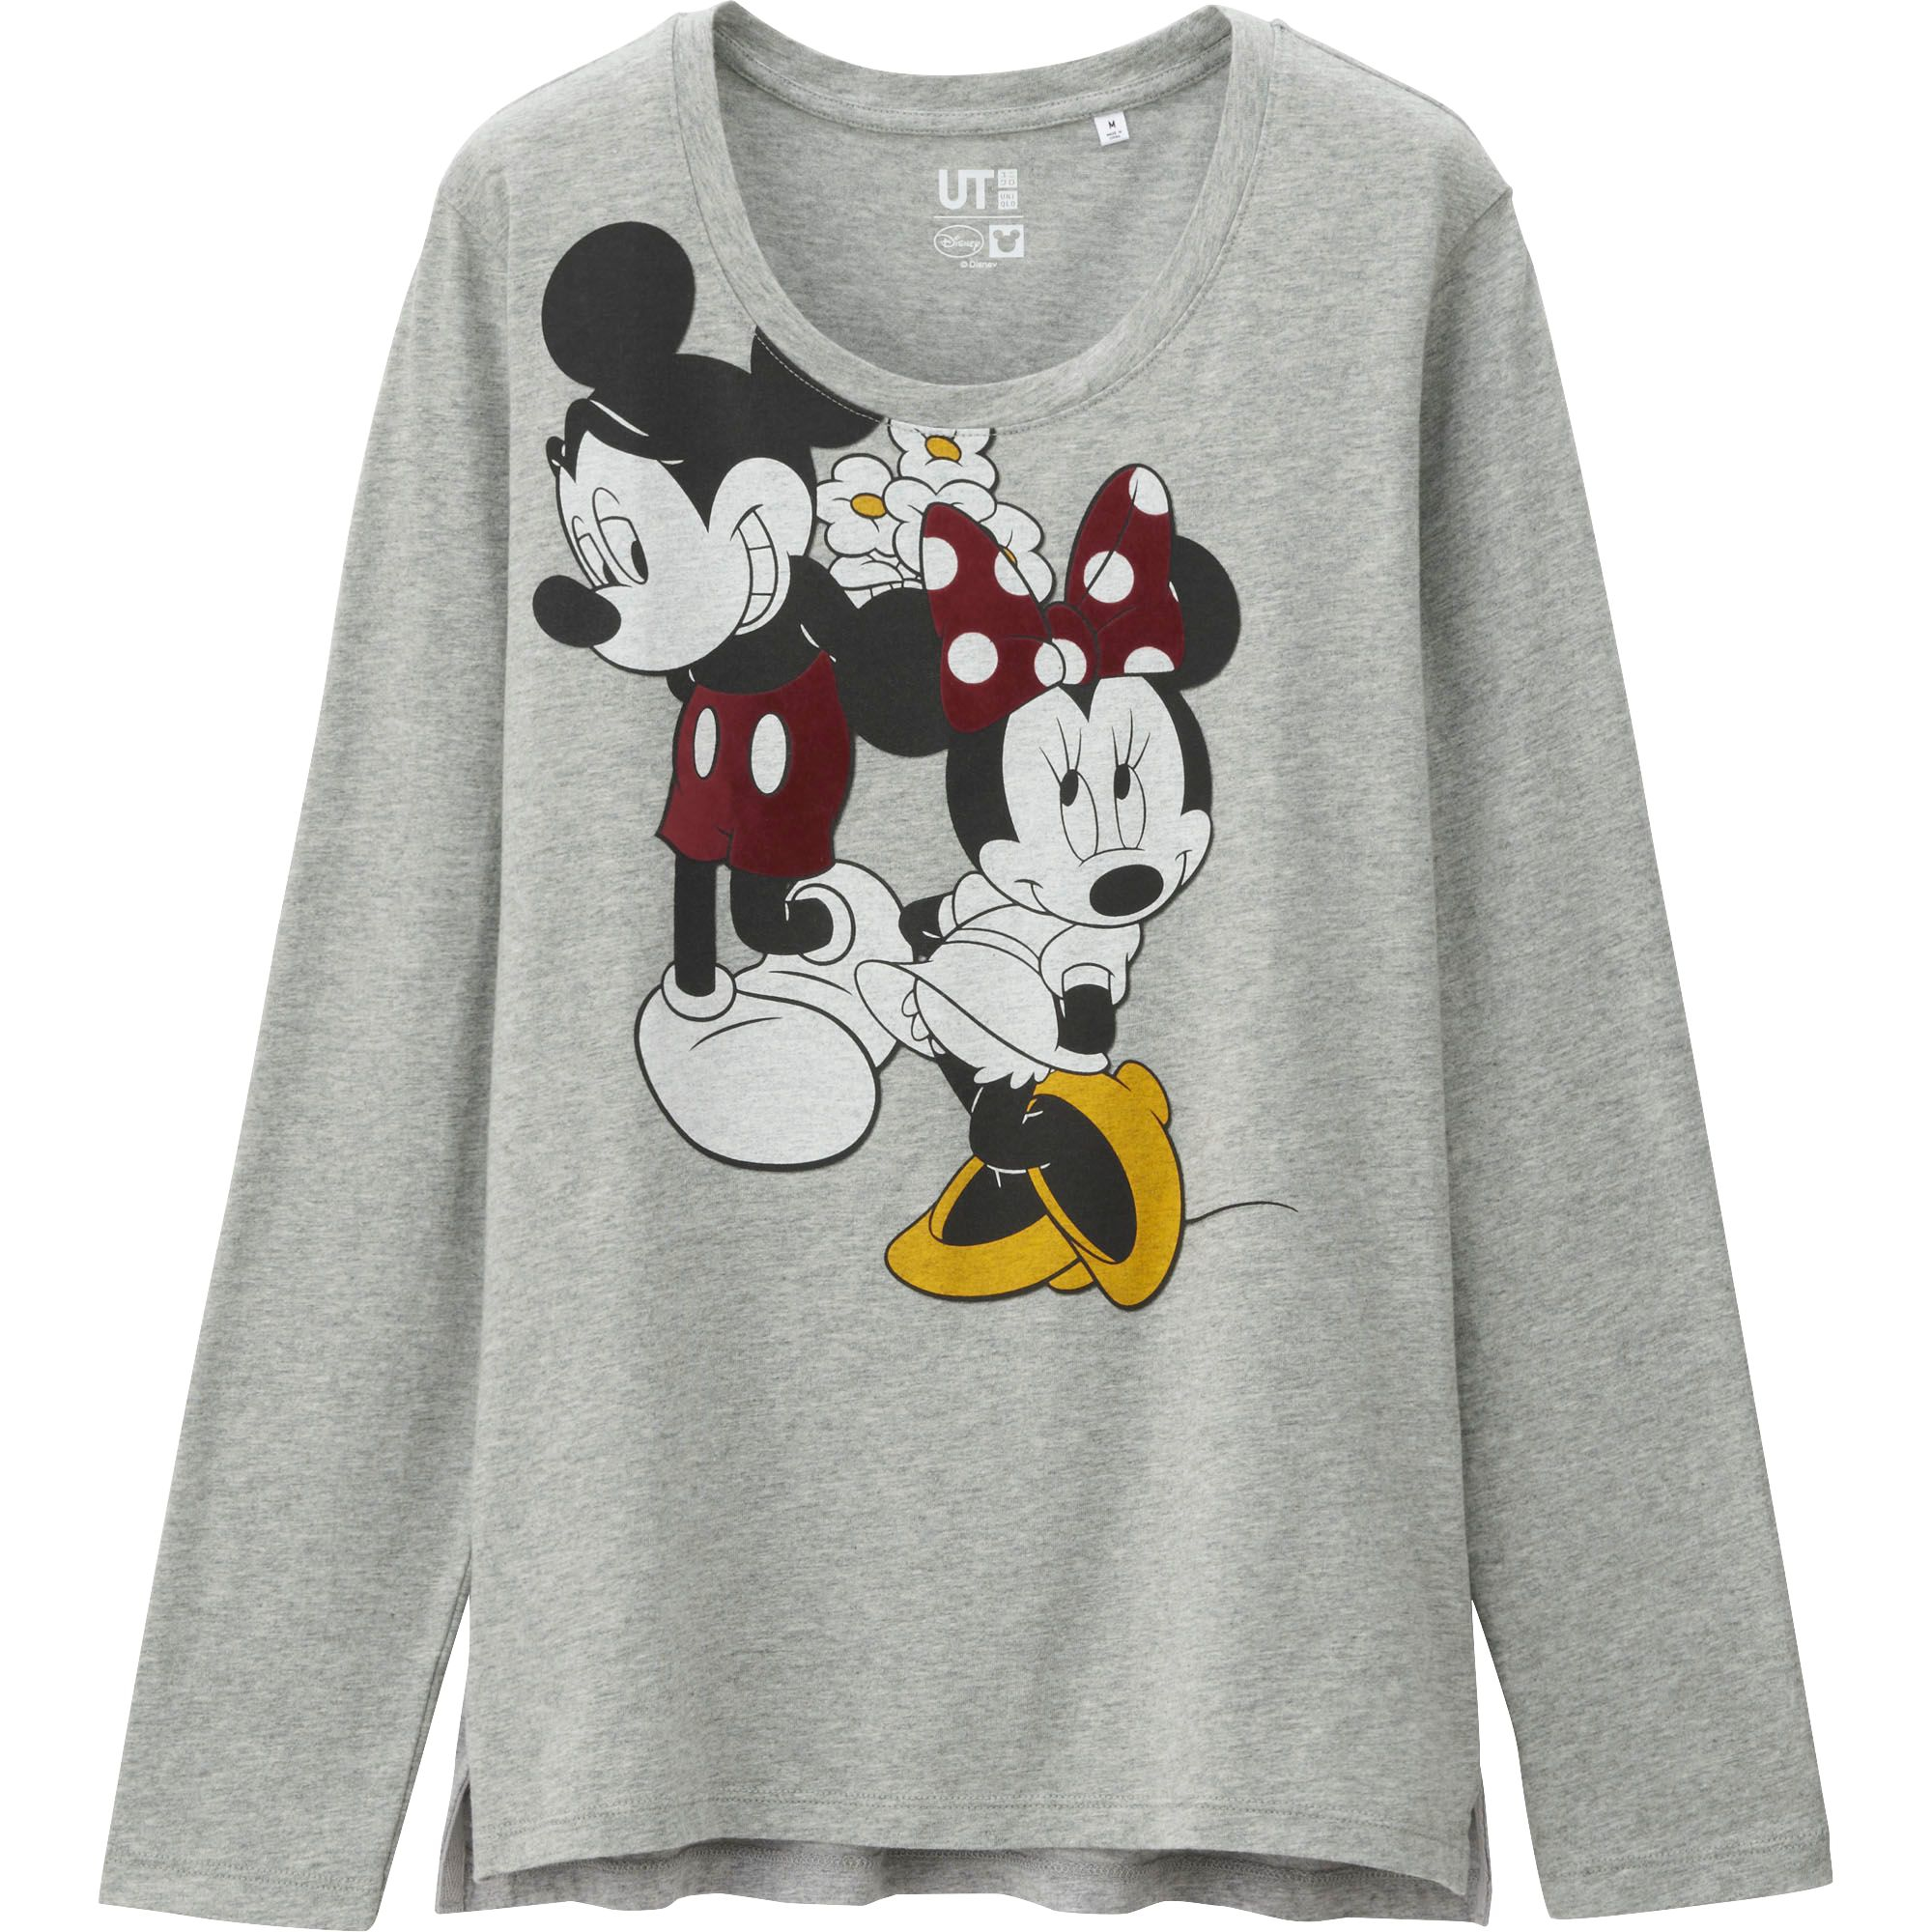 Uniqlo Women Disney Project Long Sleeve Graphic Tshirt in